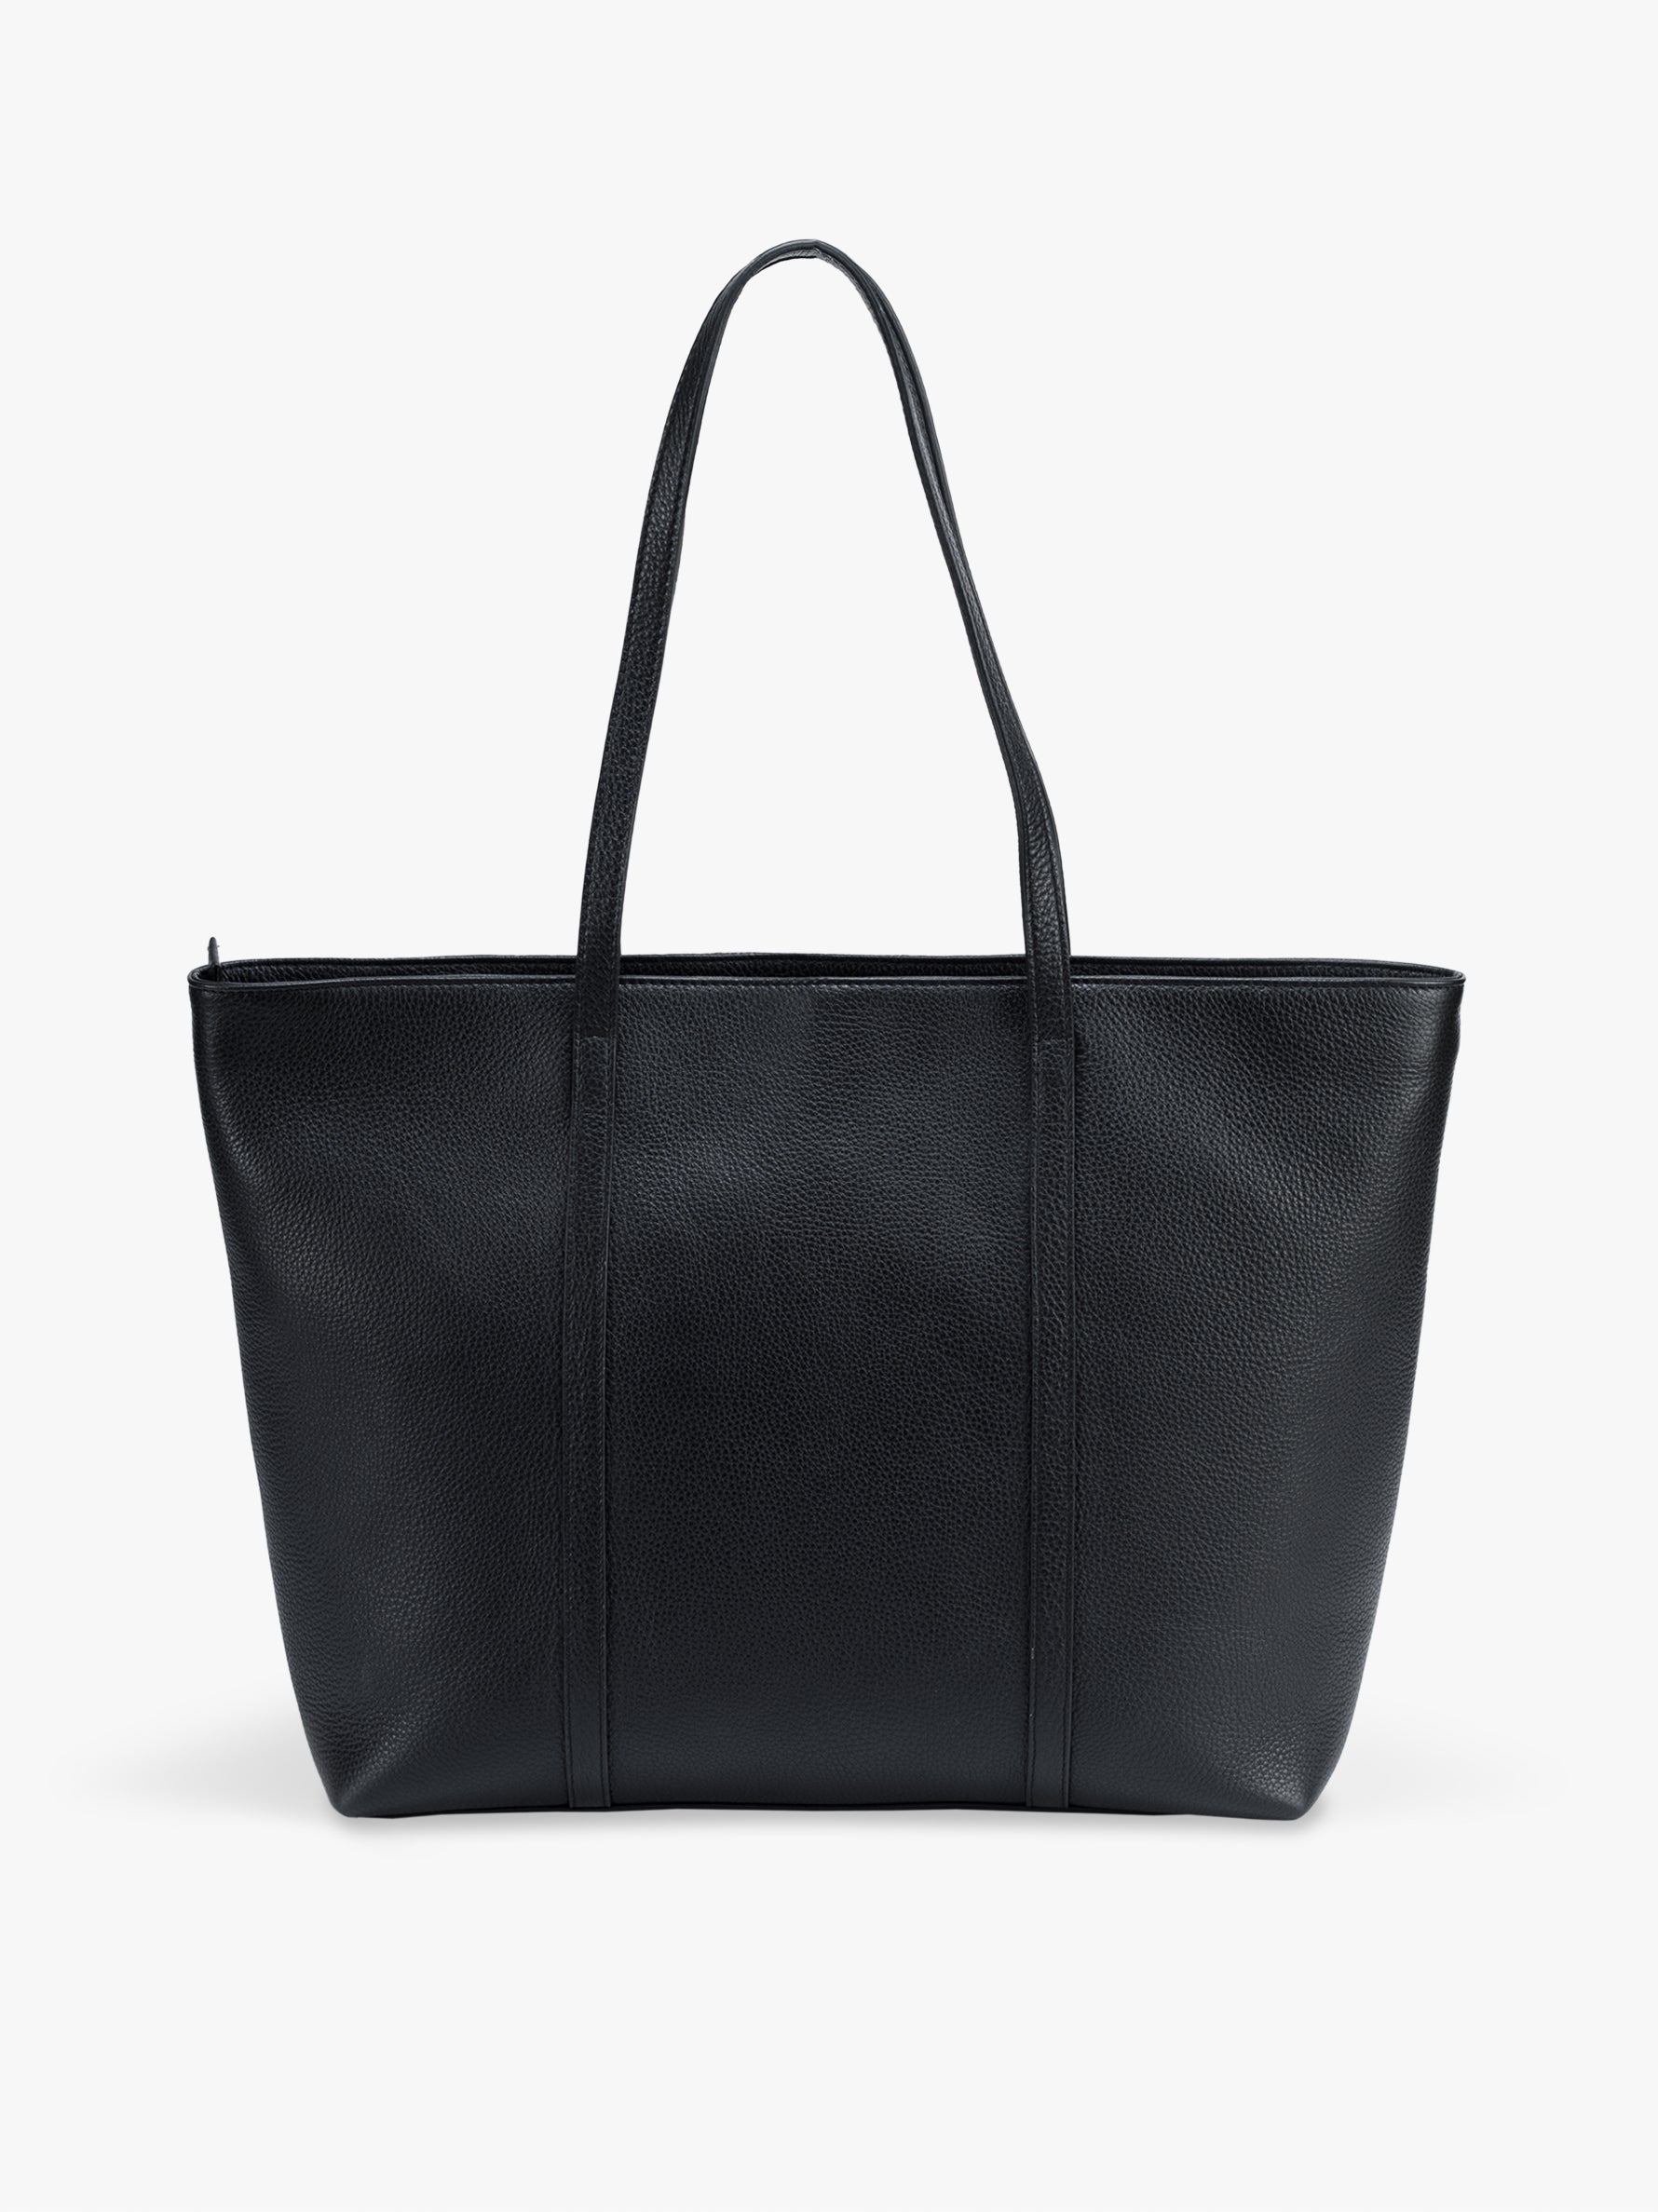 Handcrafted genuine leather 365 days tote bag for women Classic Black